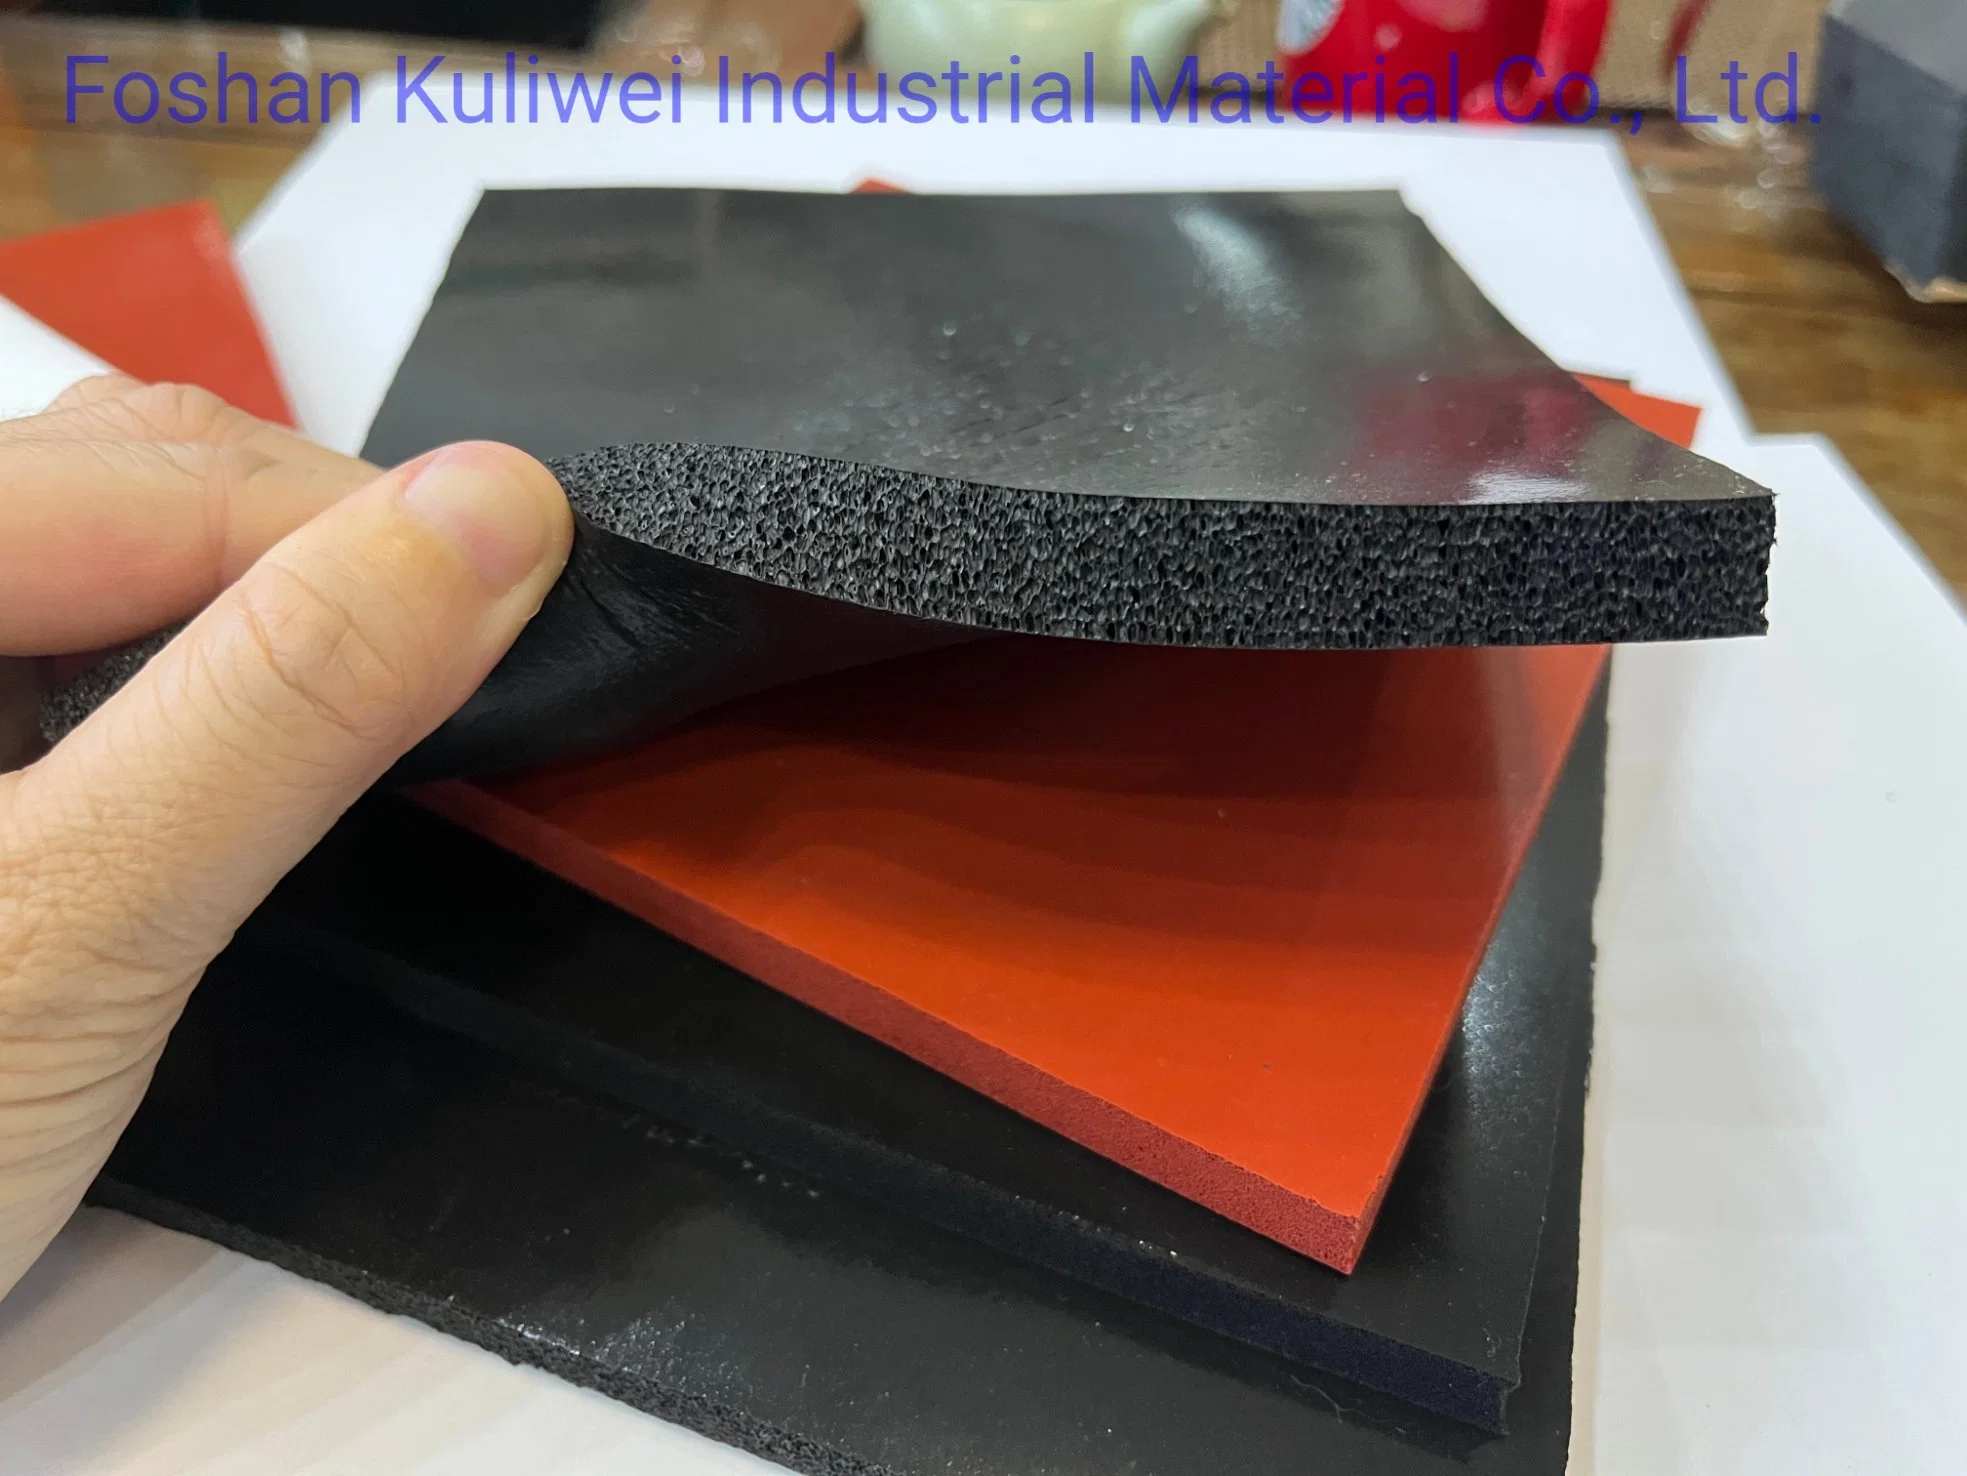 Insulation Closed Cell Silicone Foam Pad Sheet Supplier, Silicone Sponge Sheet, Adhesive Foam Sheets Food Grade Silicone Foam Sheet, Silicone Sponge Sheet